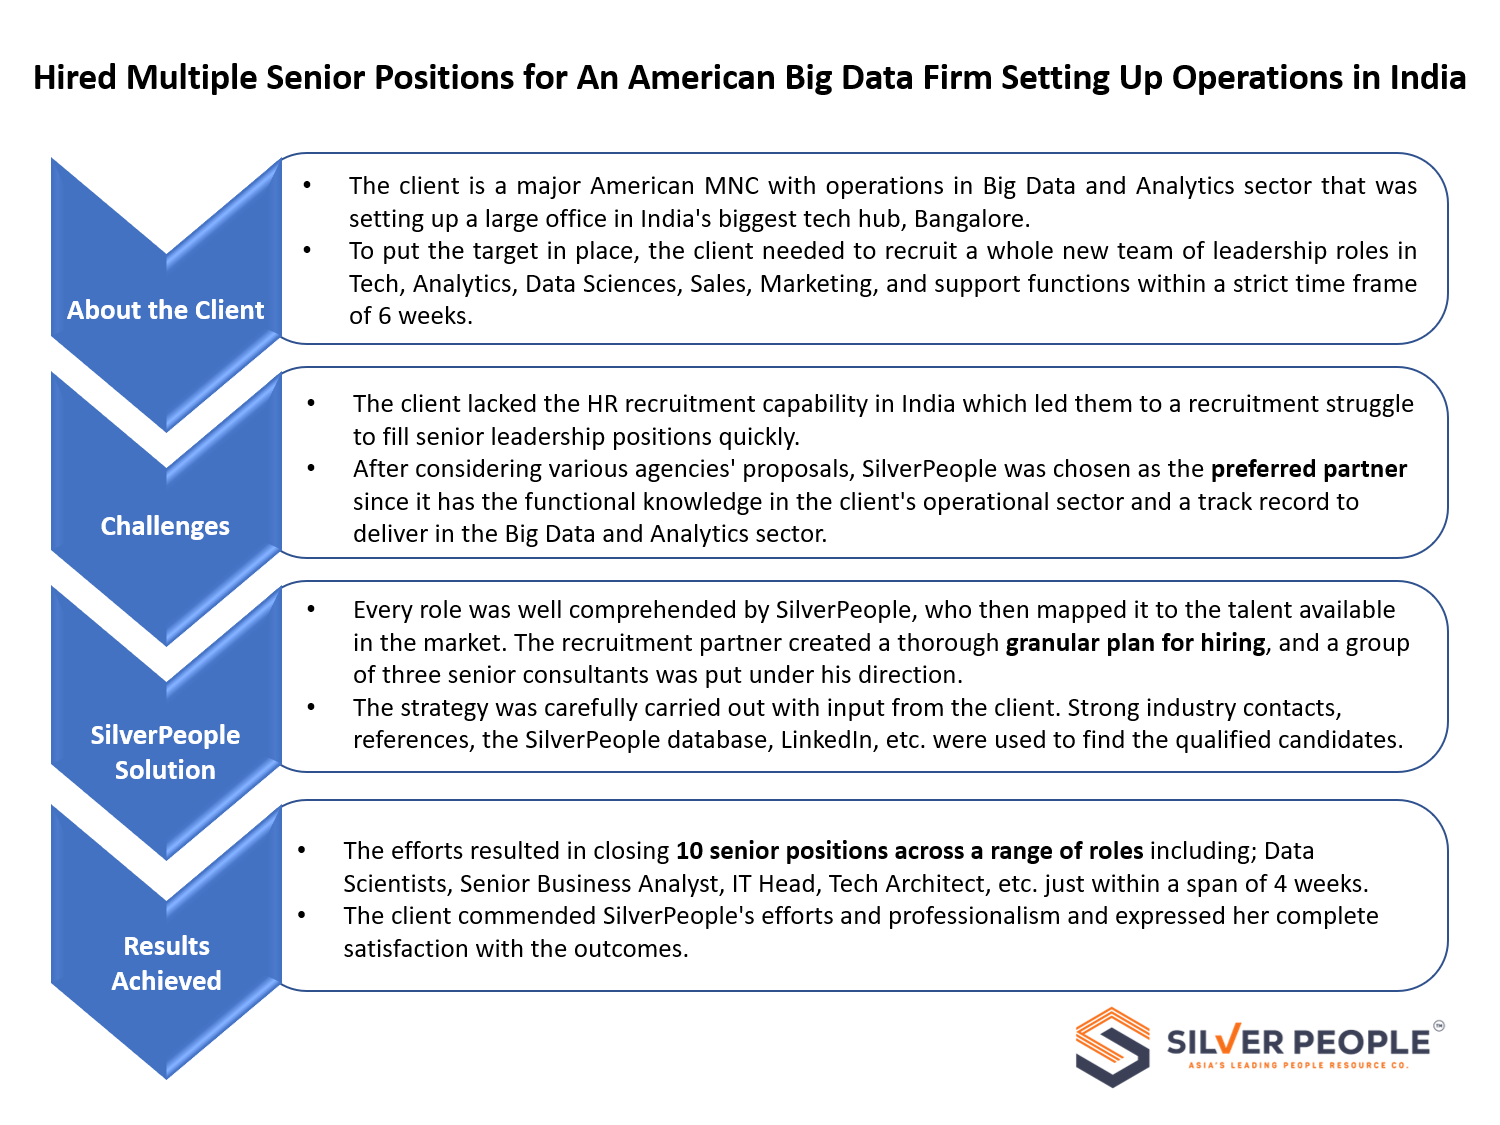 Hired Multiple Senior Positions for an American Big Data Firm Setting Up Operations in India